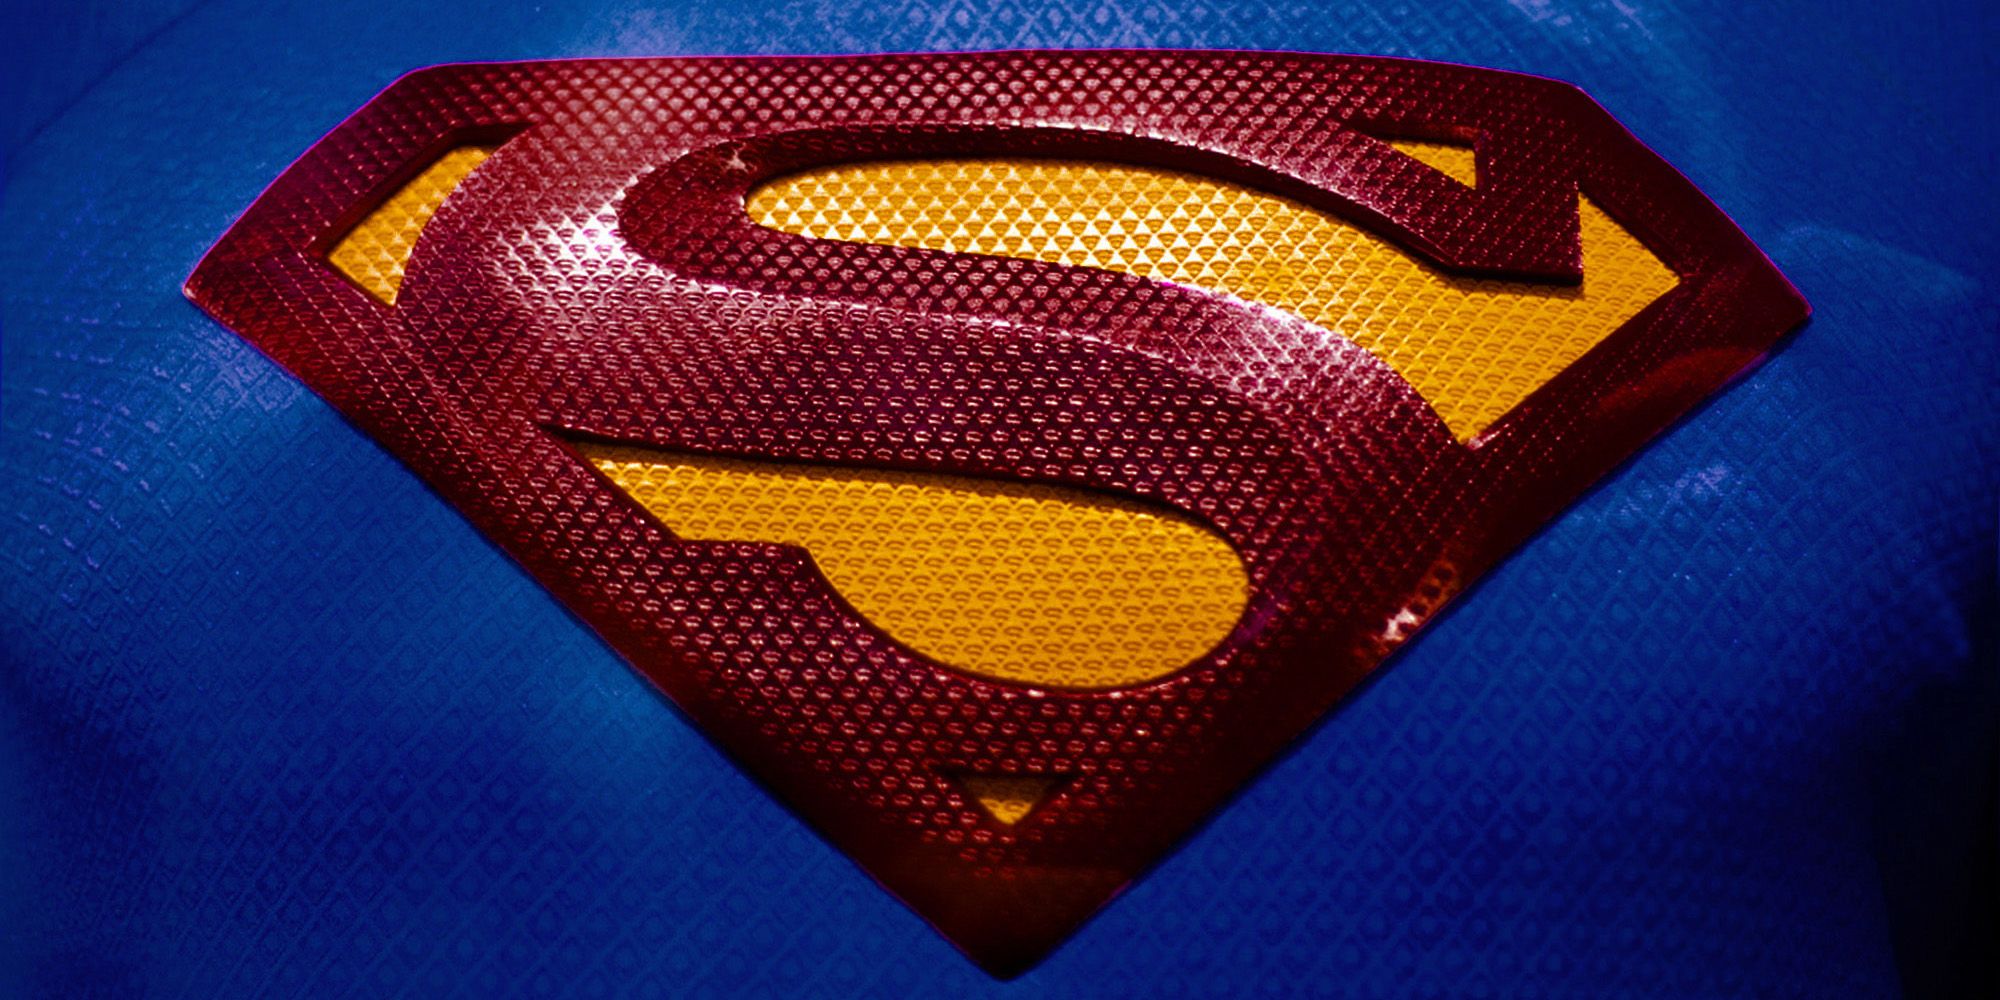 When Did Superman's 'S' Symbol Change Its Meaning?